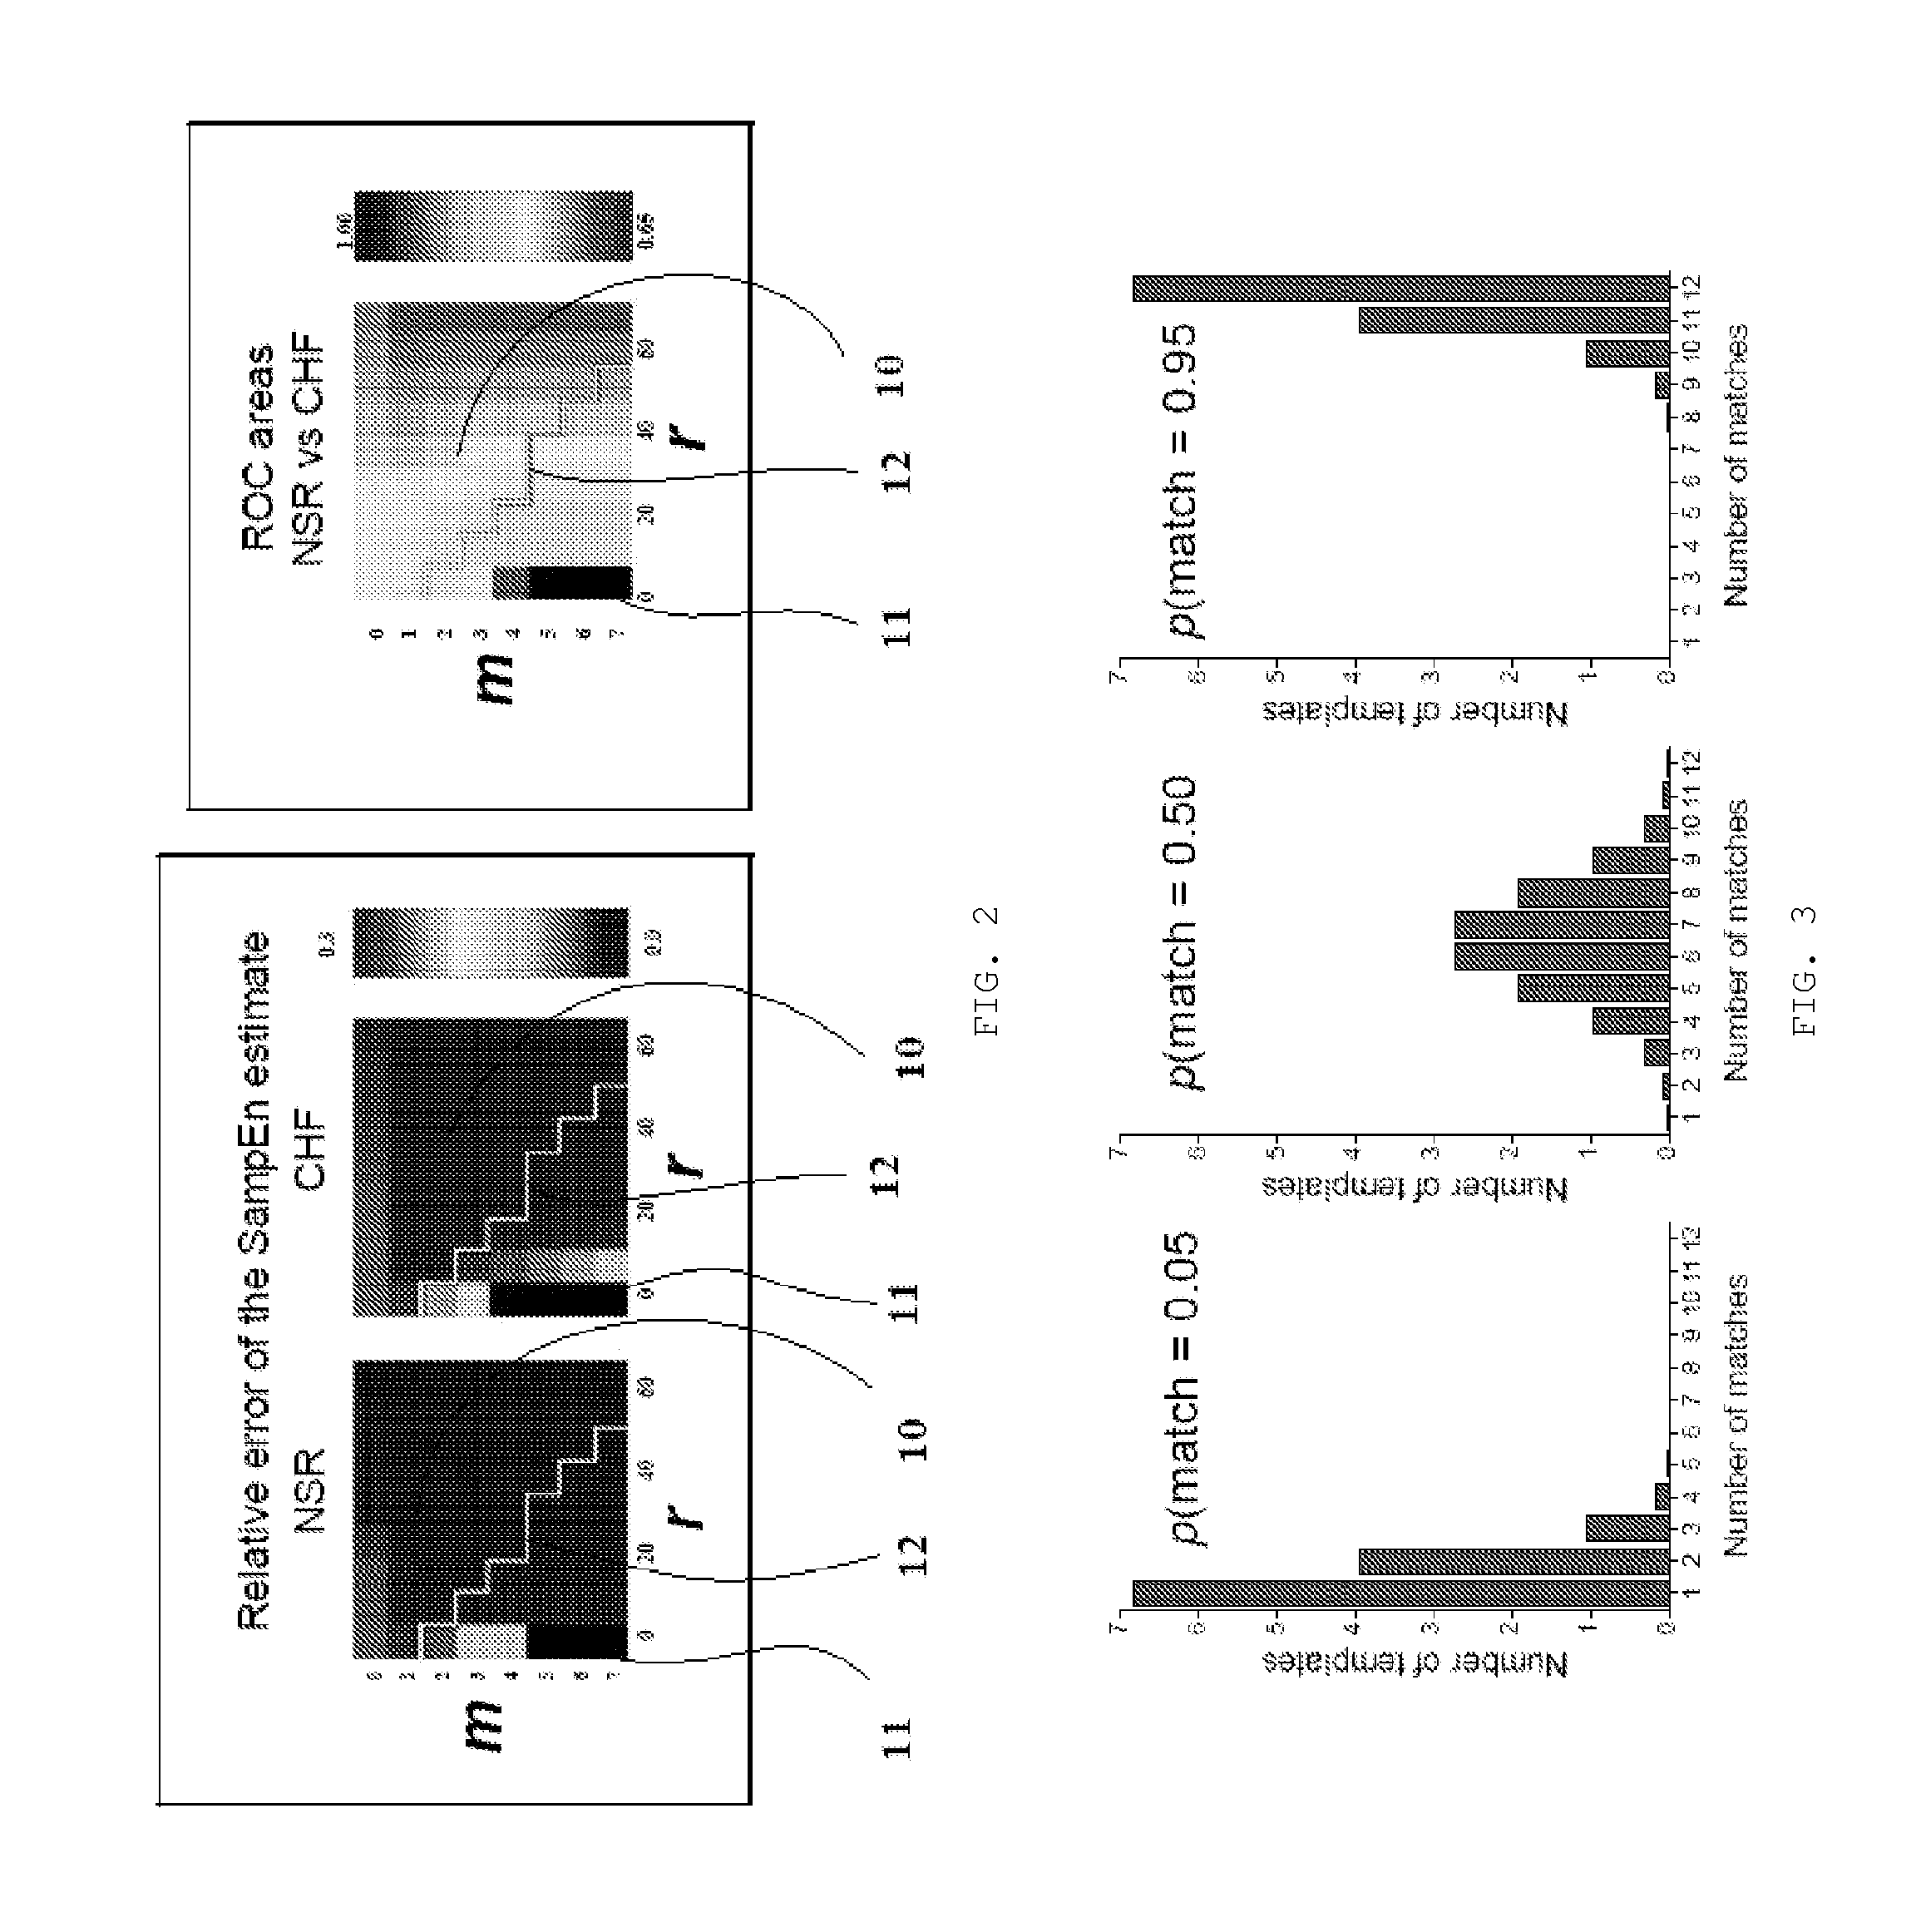 System, method and computer program product for detection of changes in health status and risk of imminent illness